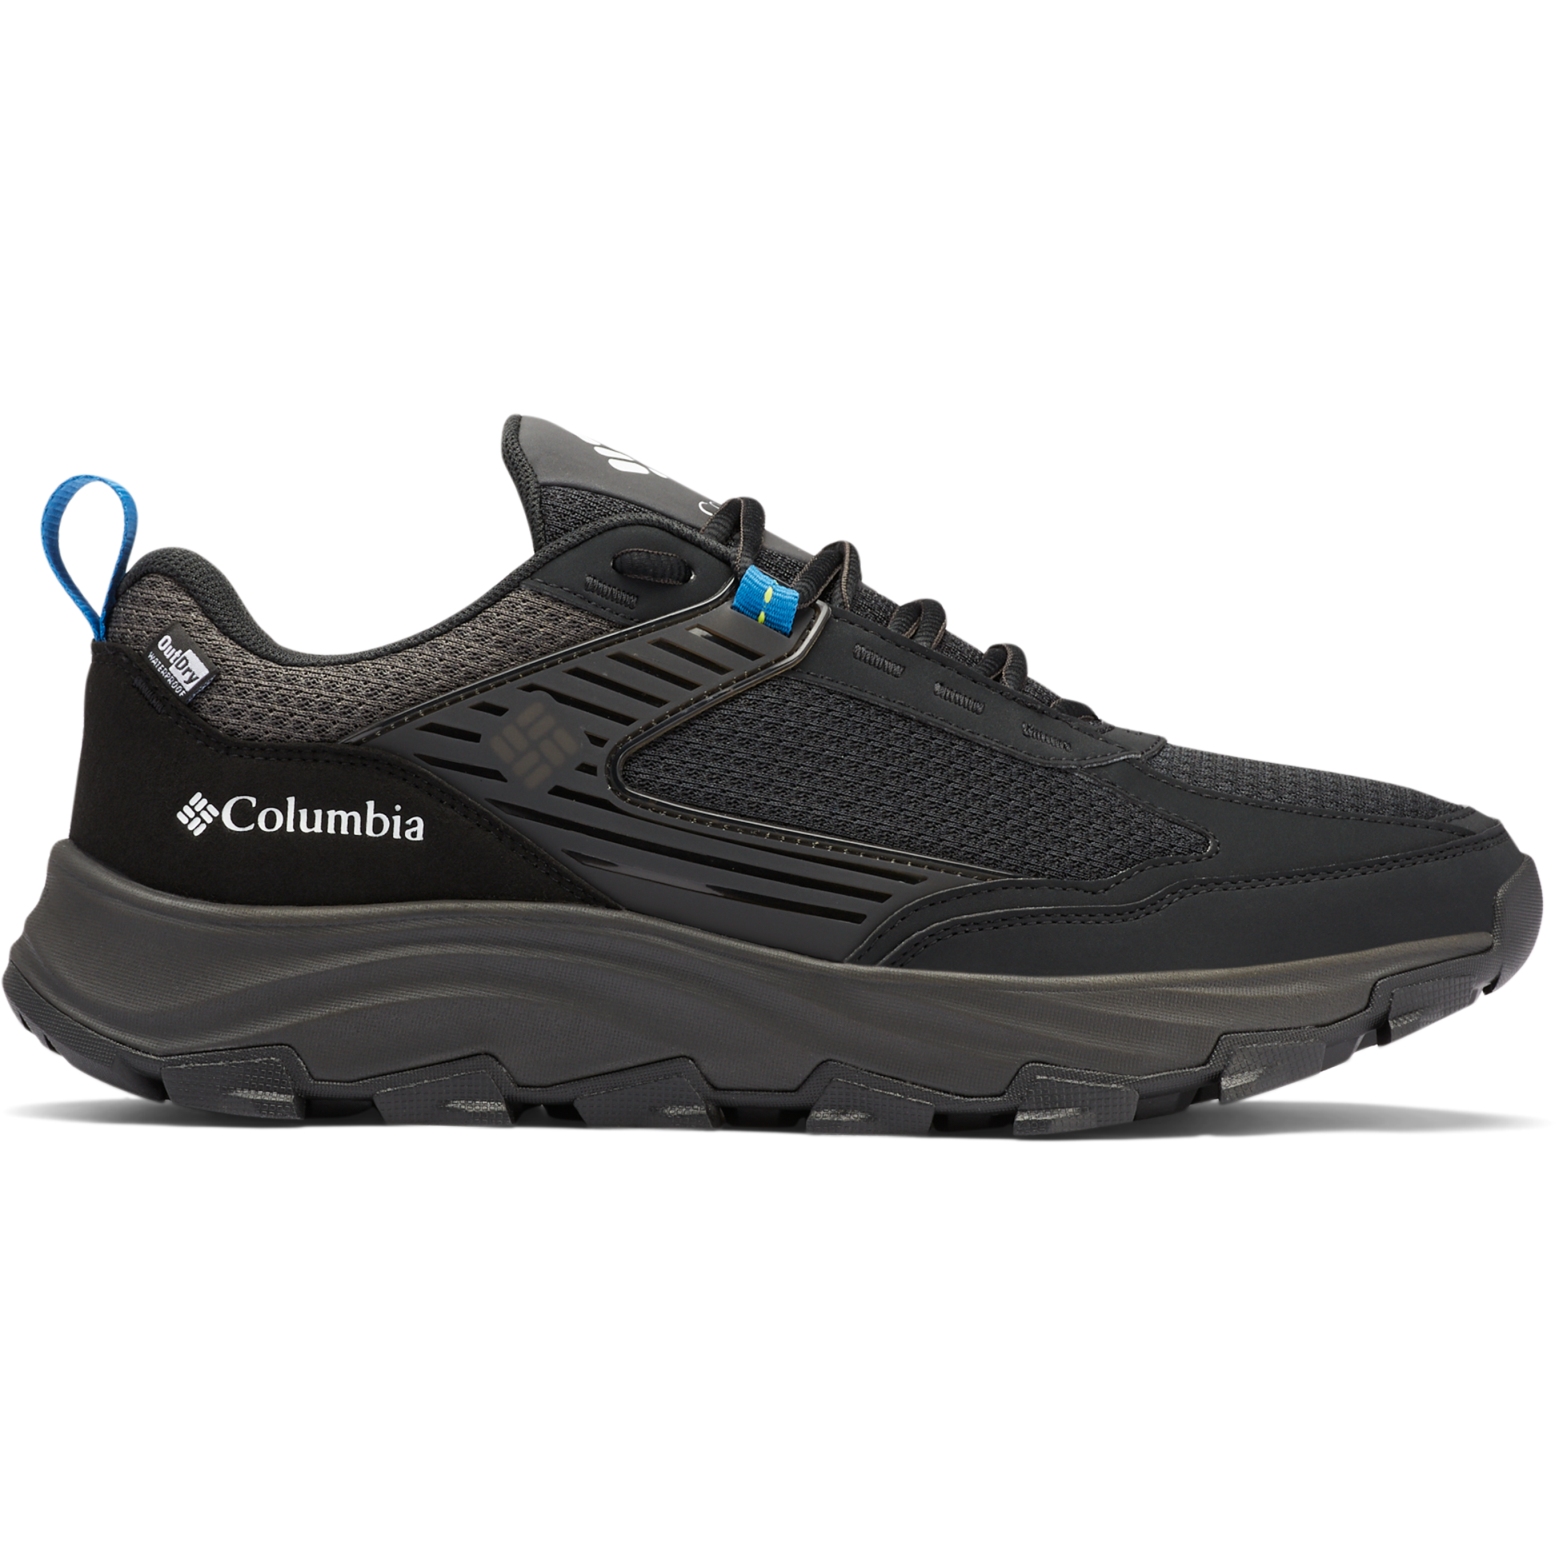 Picture of Columbia Hatana Max Outdry Hiking Shoes - Black/White